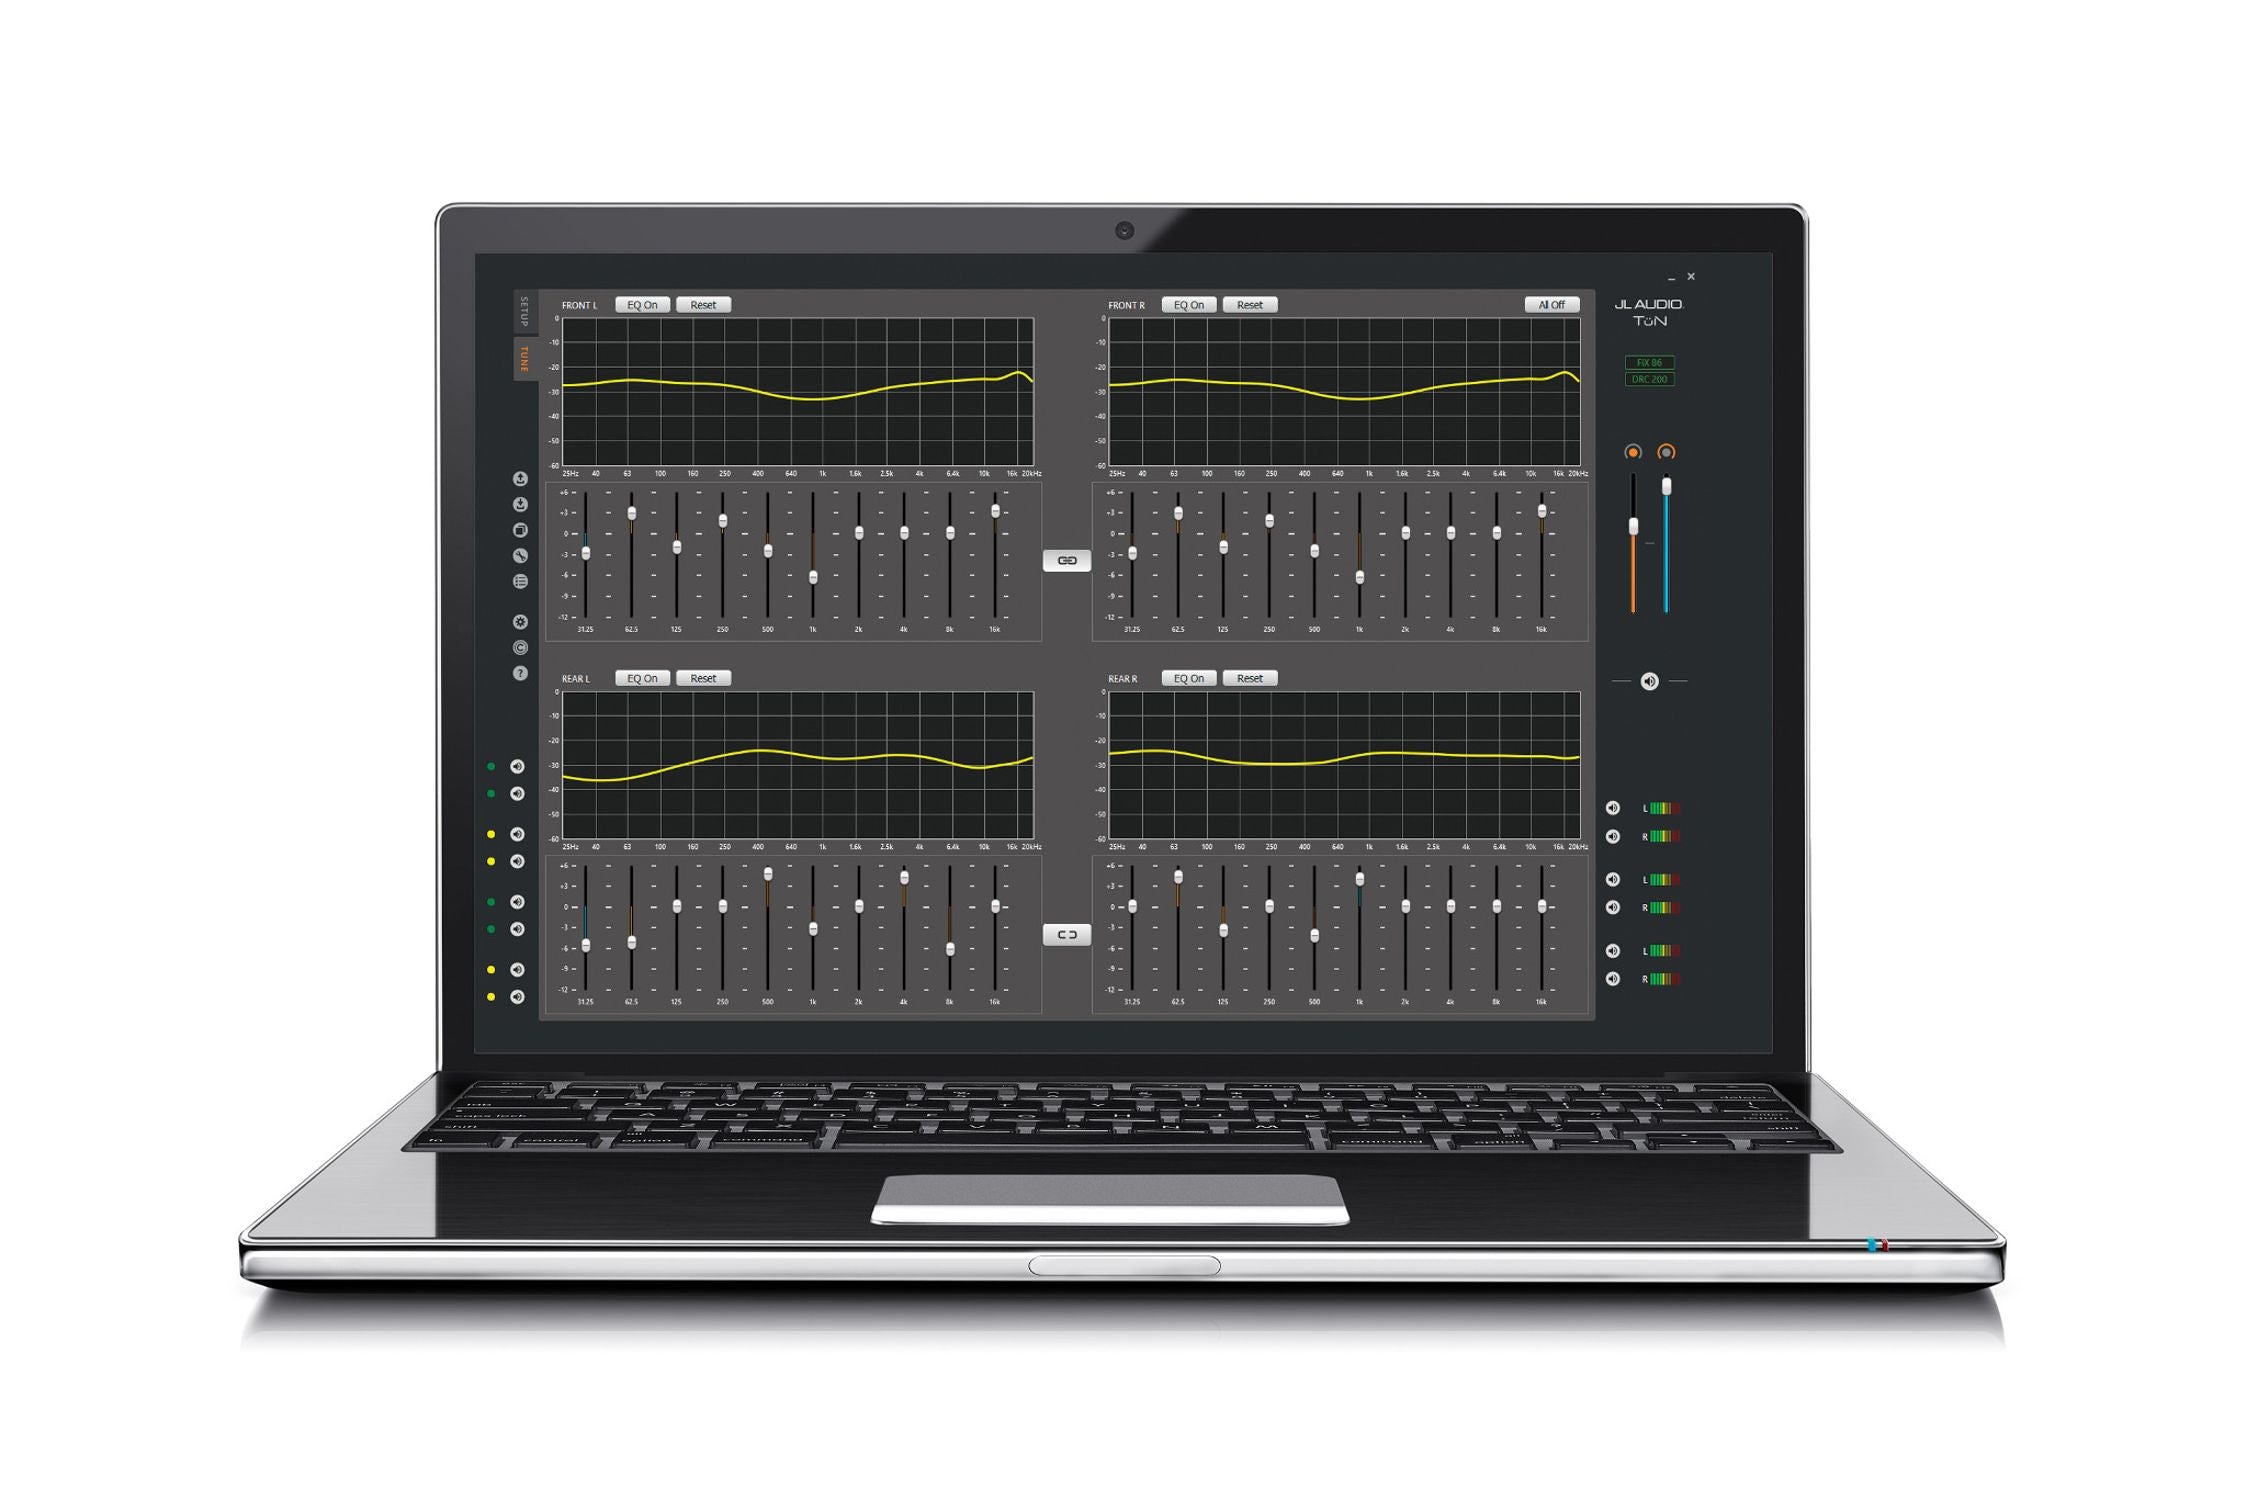 Laptop showing the Tune Window in TüN Software for FiX-86